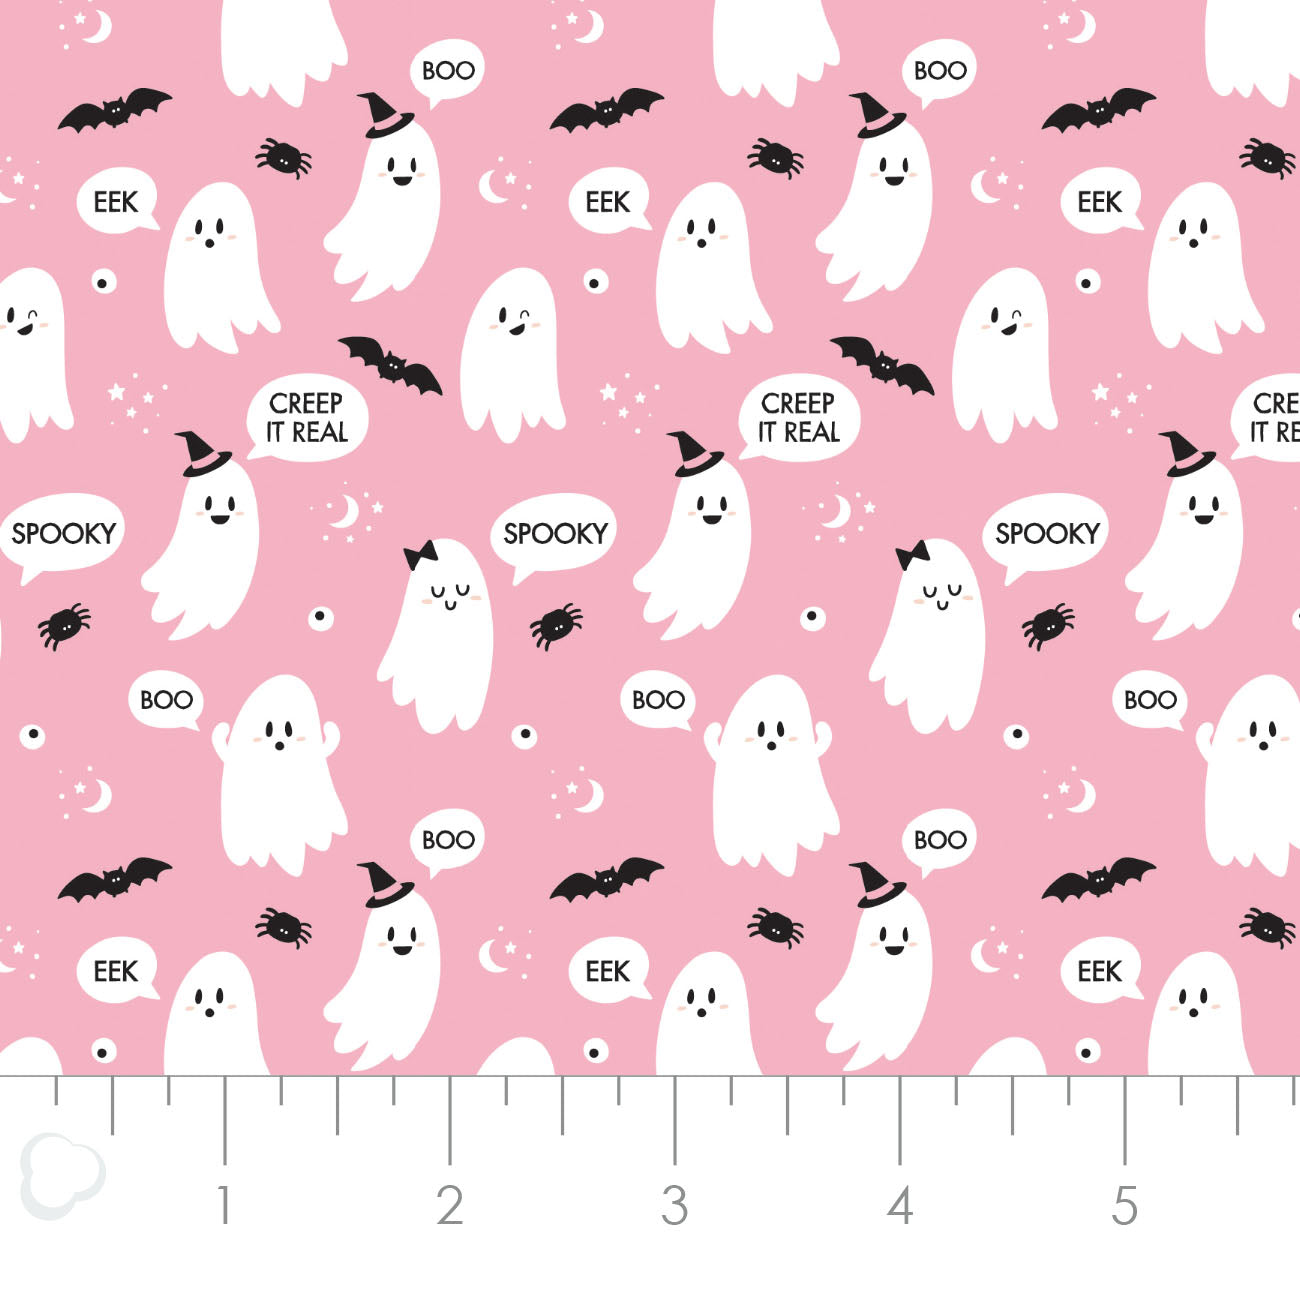 Hey Boo Creep It Real in Pink  Pink   21211001-02 Cotton Woven Fabric